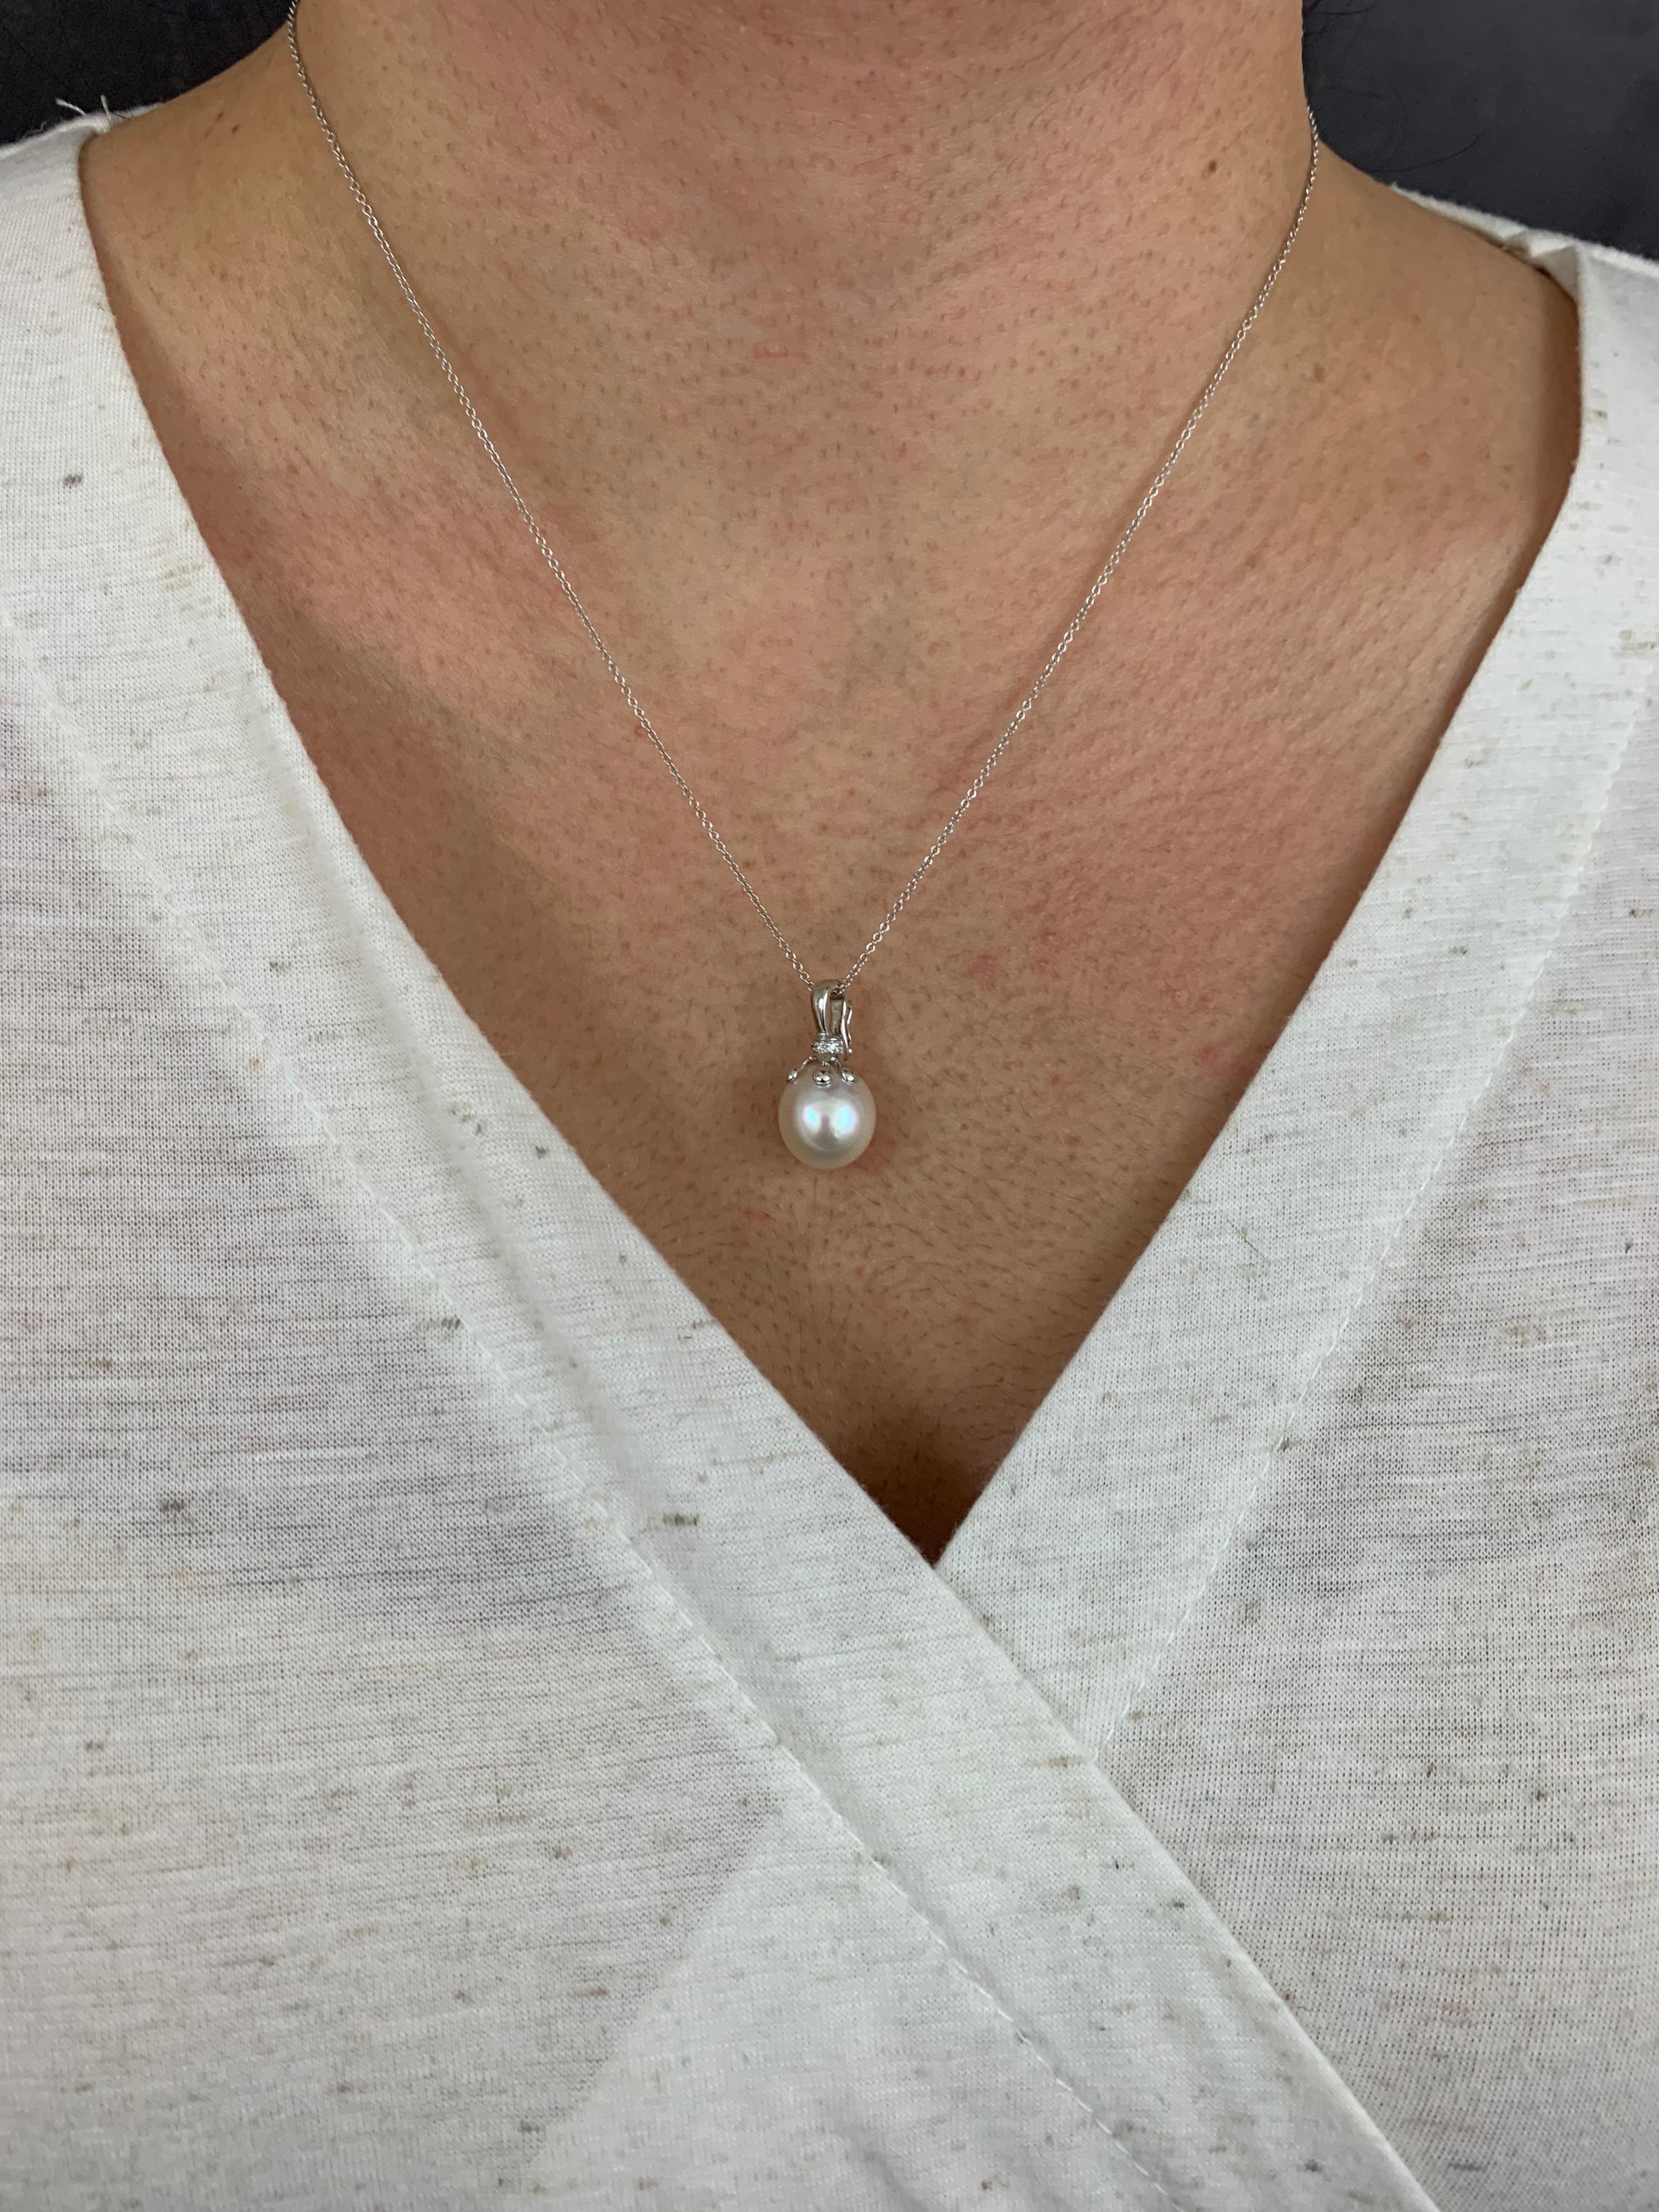 14K White Gold

Stone Details: 1 Round Tahitian South Sea Pearl at 2.32 Carats

Diamond Details: 3 Brilliant Round White Diamonds at 0.02 Carats - Clarity: SI / Color: H-I


Fine one-of-a-kind craftsmanship meets incredible quality in this